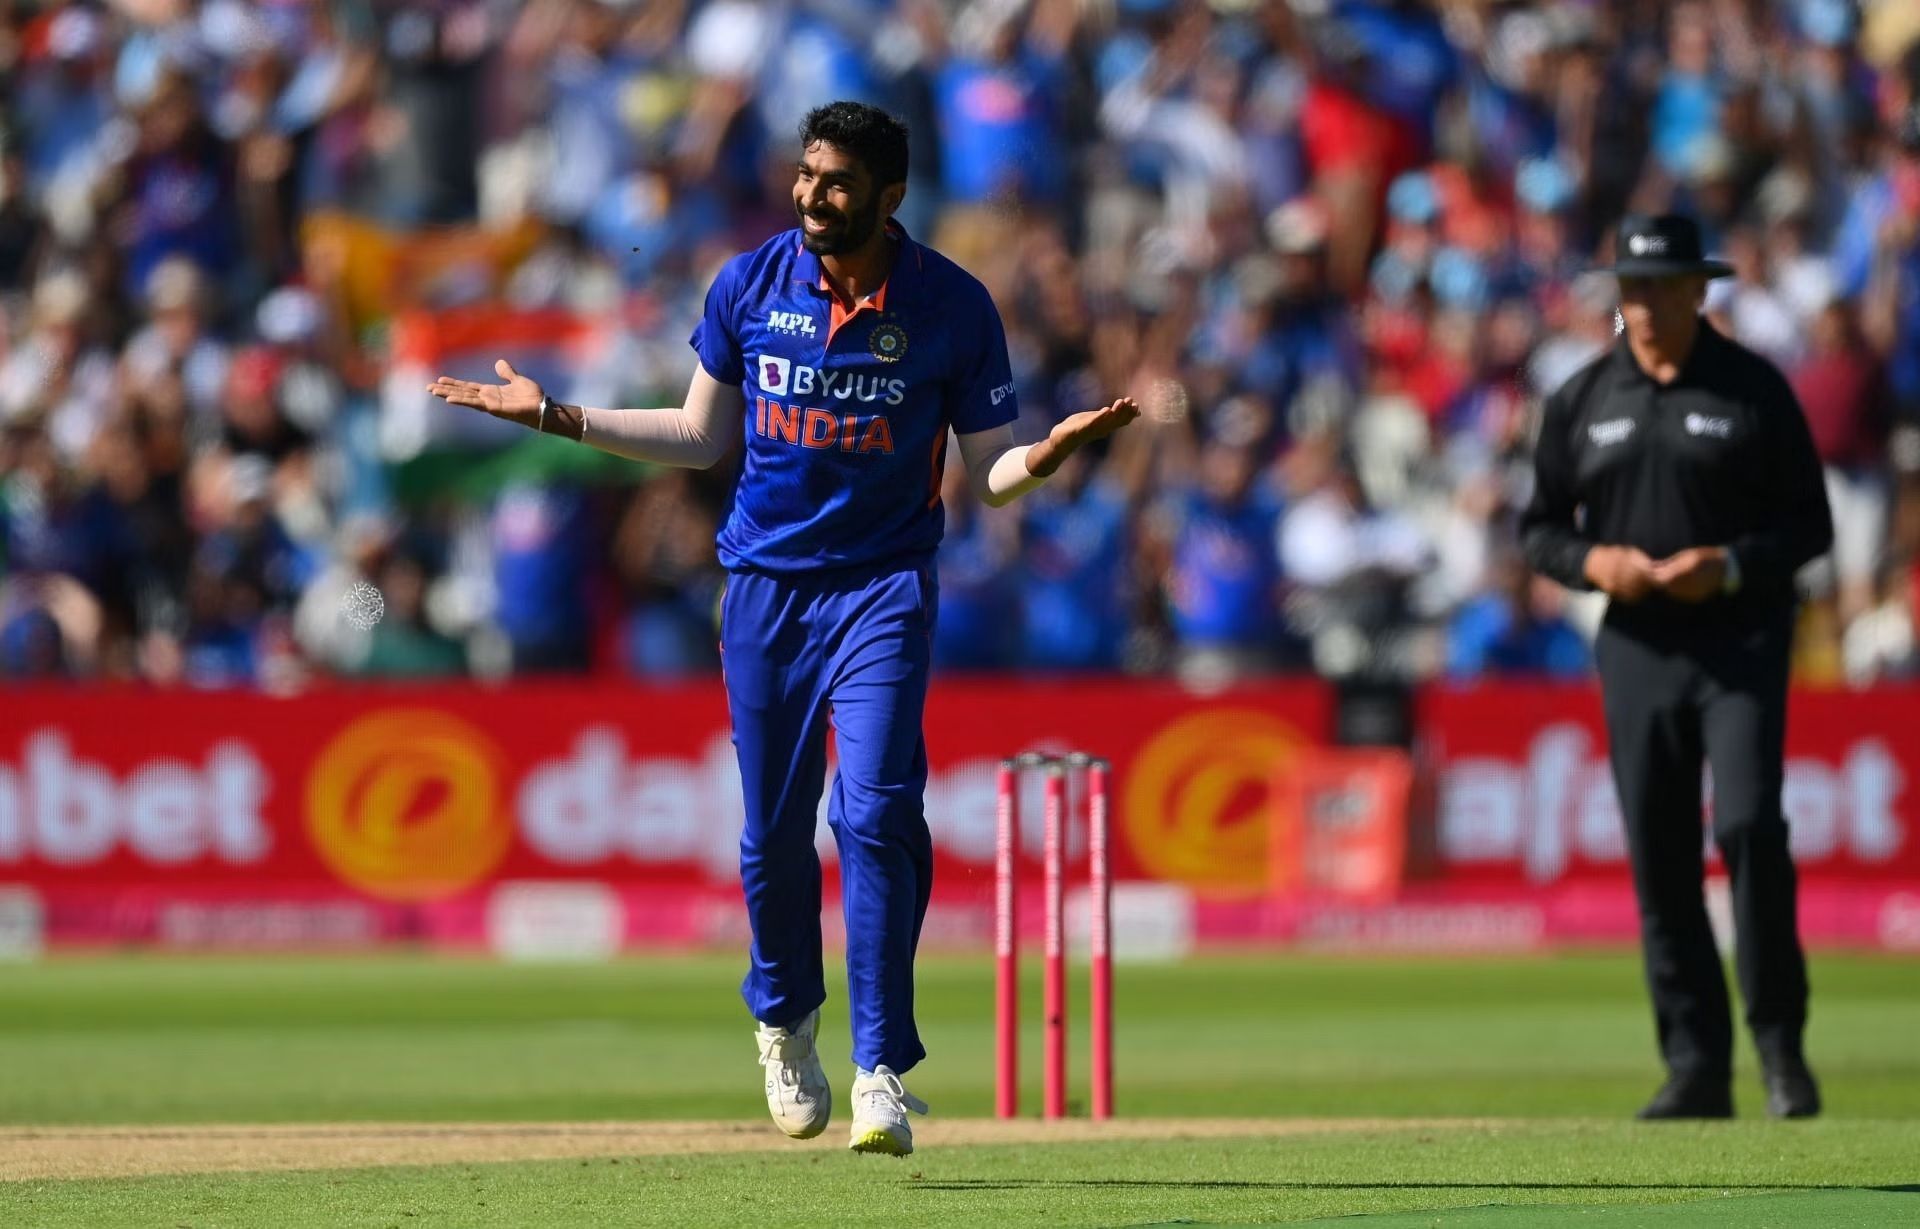 Jasprit Bumrah is expected to lead the Indian seam attack.